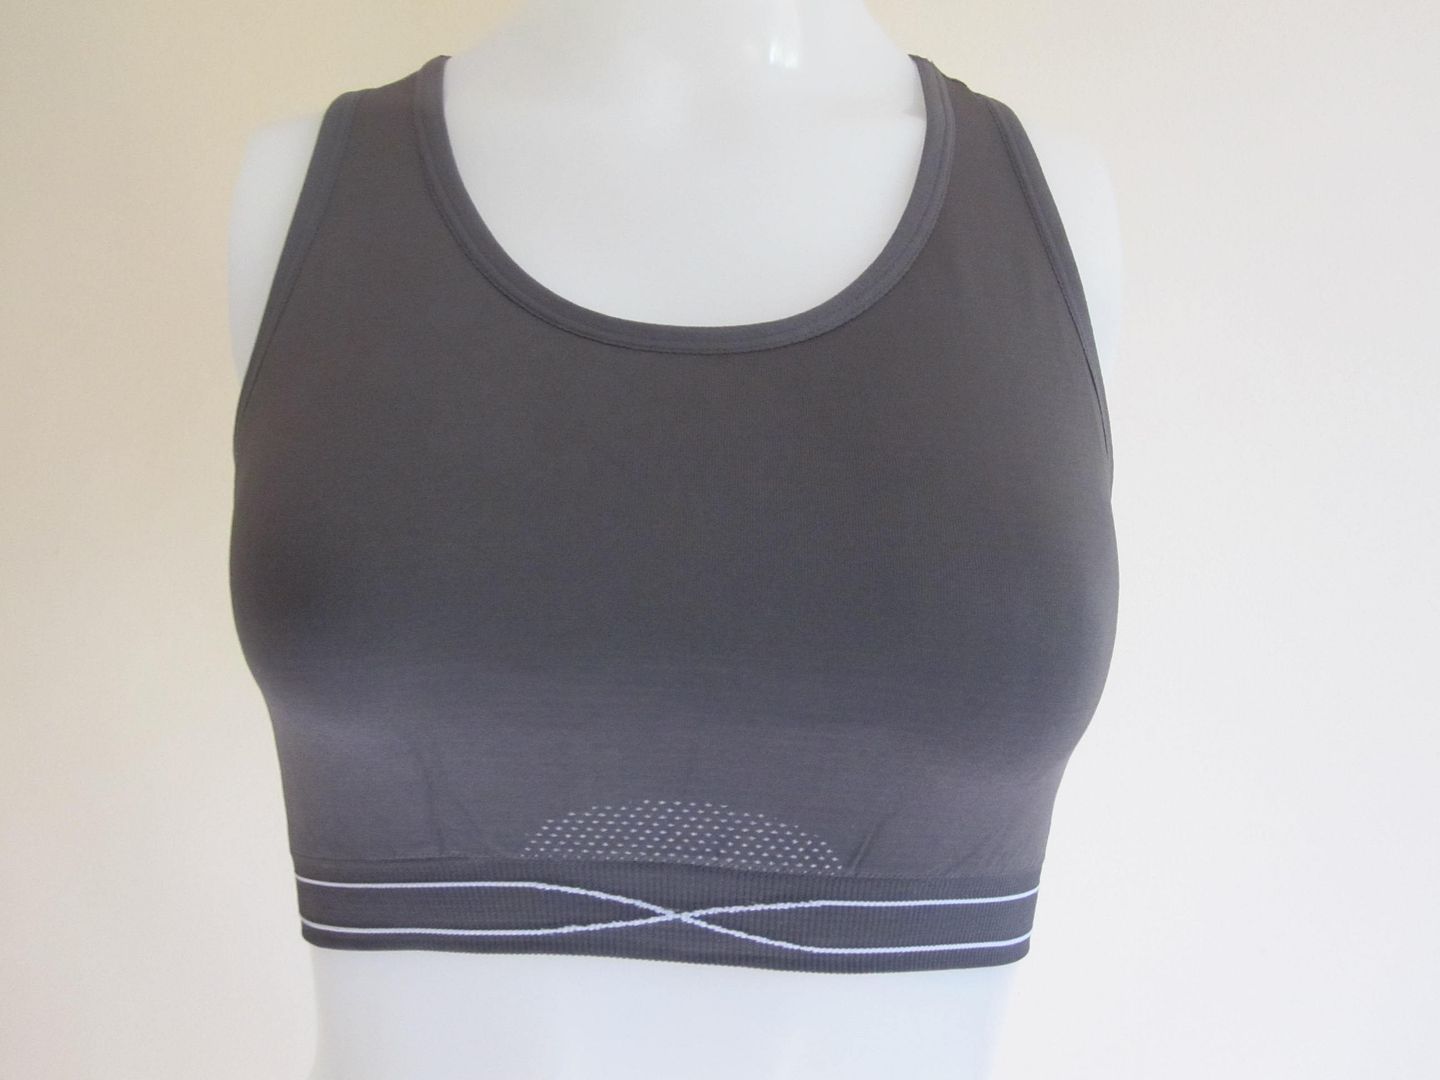 PRO-FIT SEAMLESS LADIES RACER BACK SPORTS BRA EXERCISE TOPS VEST-GREY ...